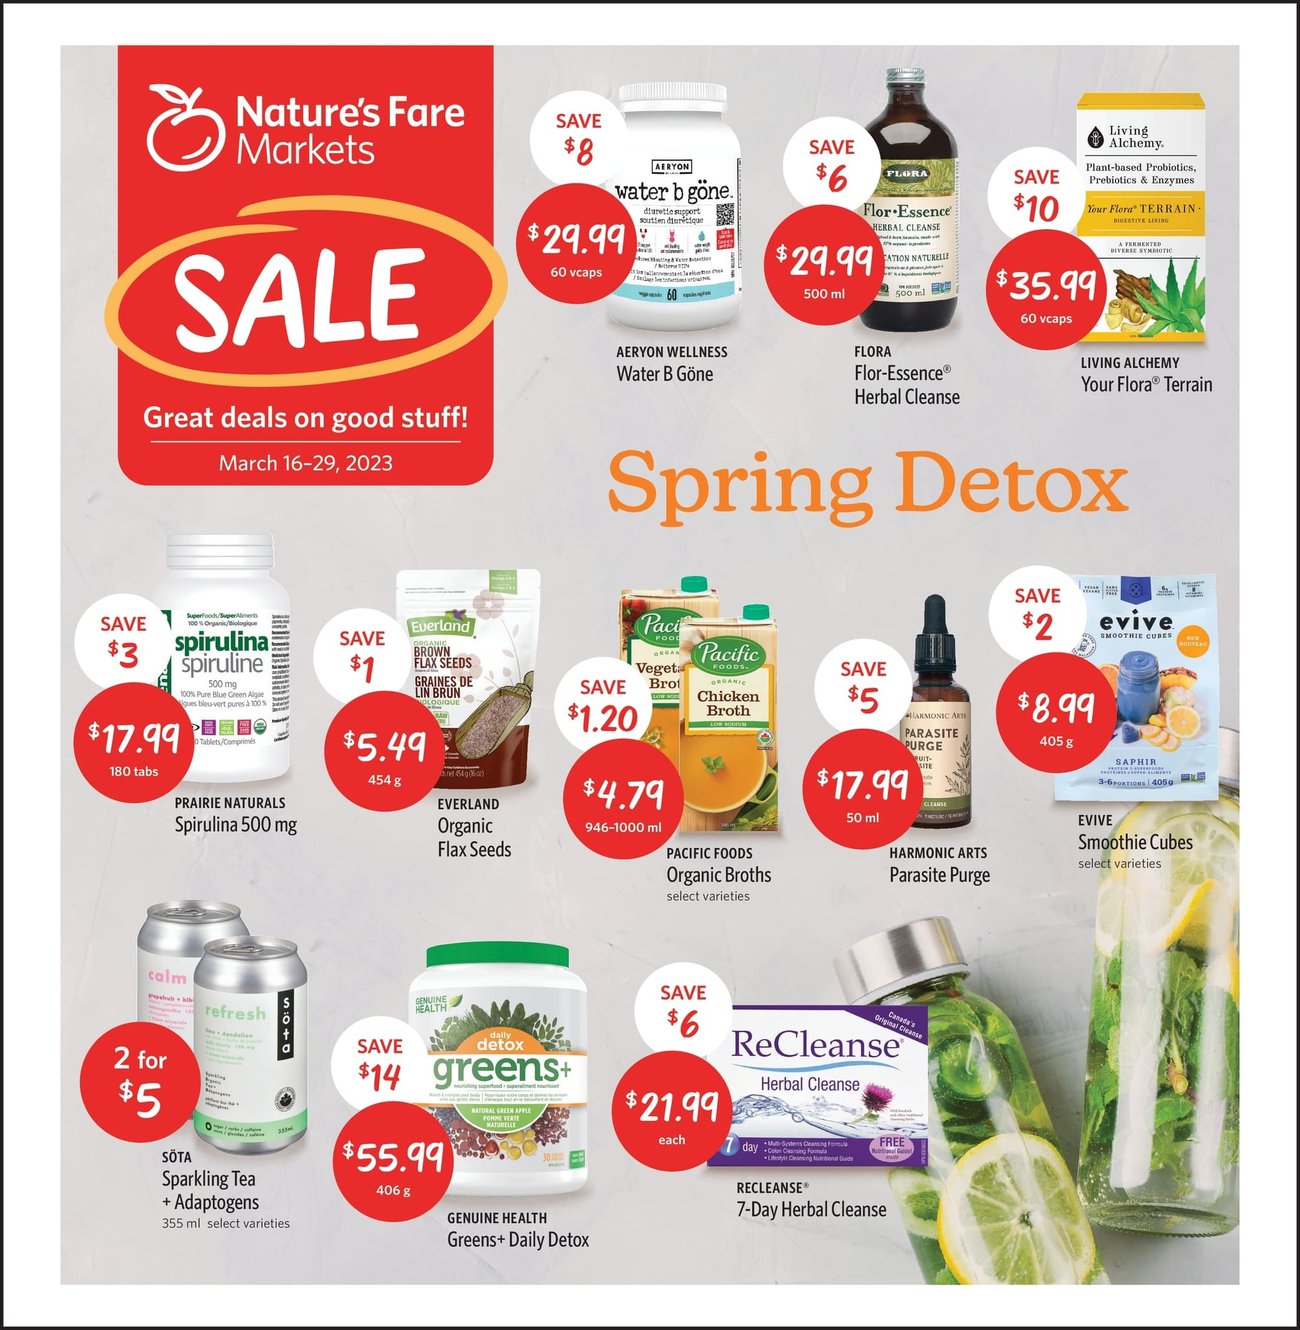 Nature's Fare Markets - 2 Weeks of Savings - Page 1